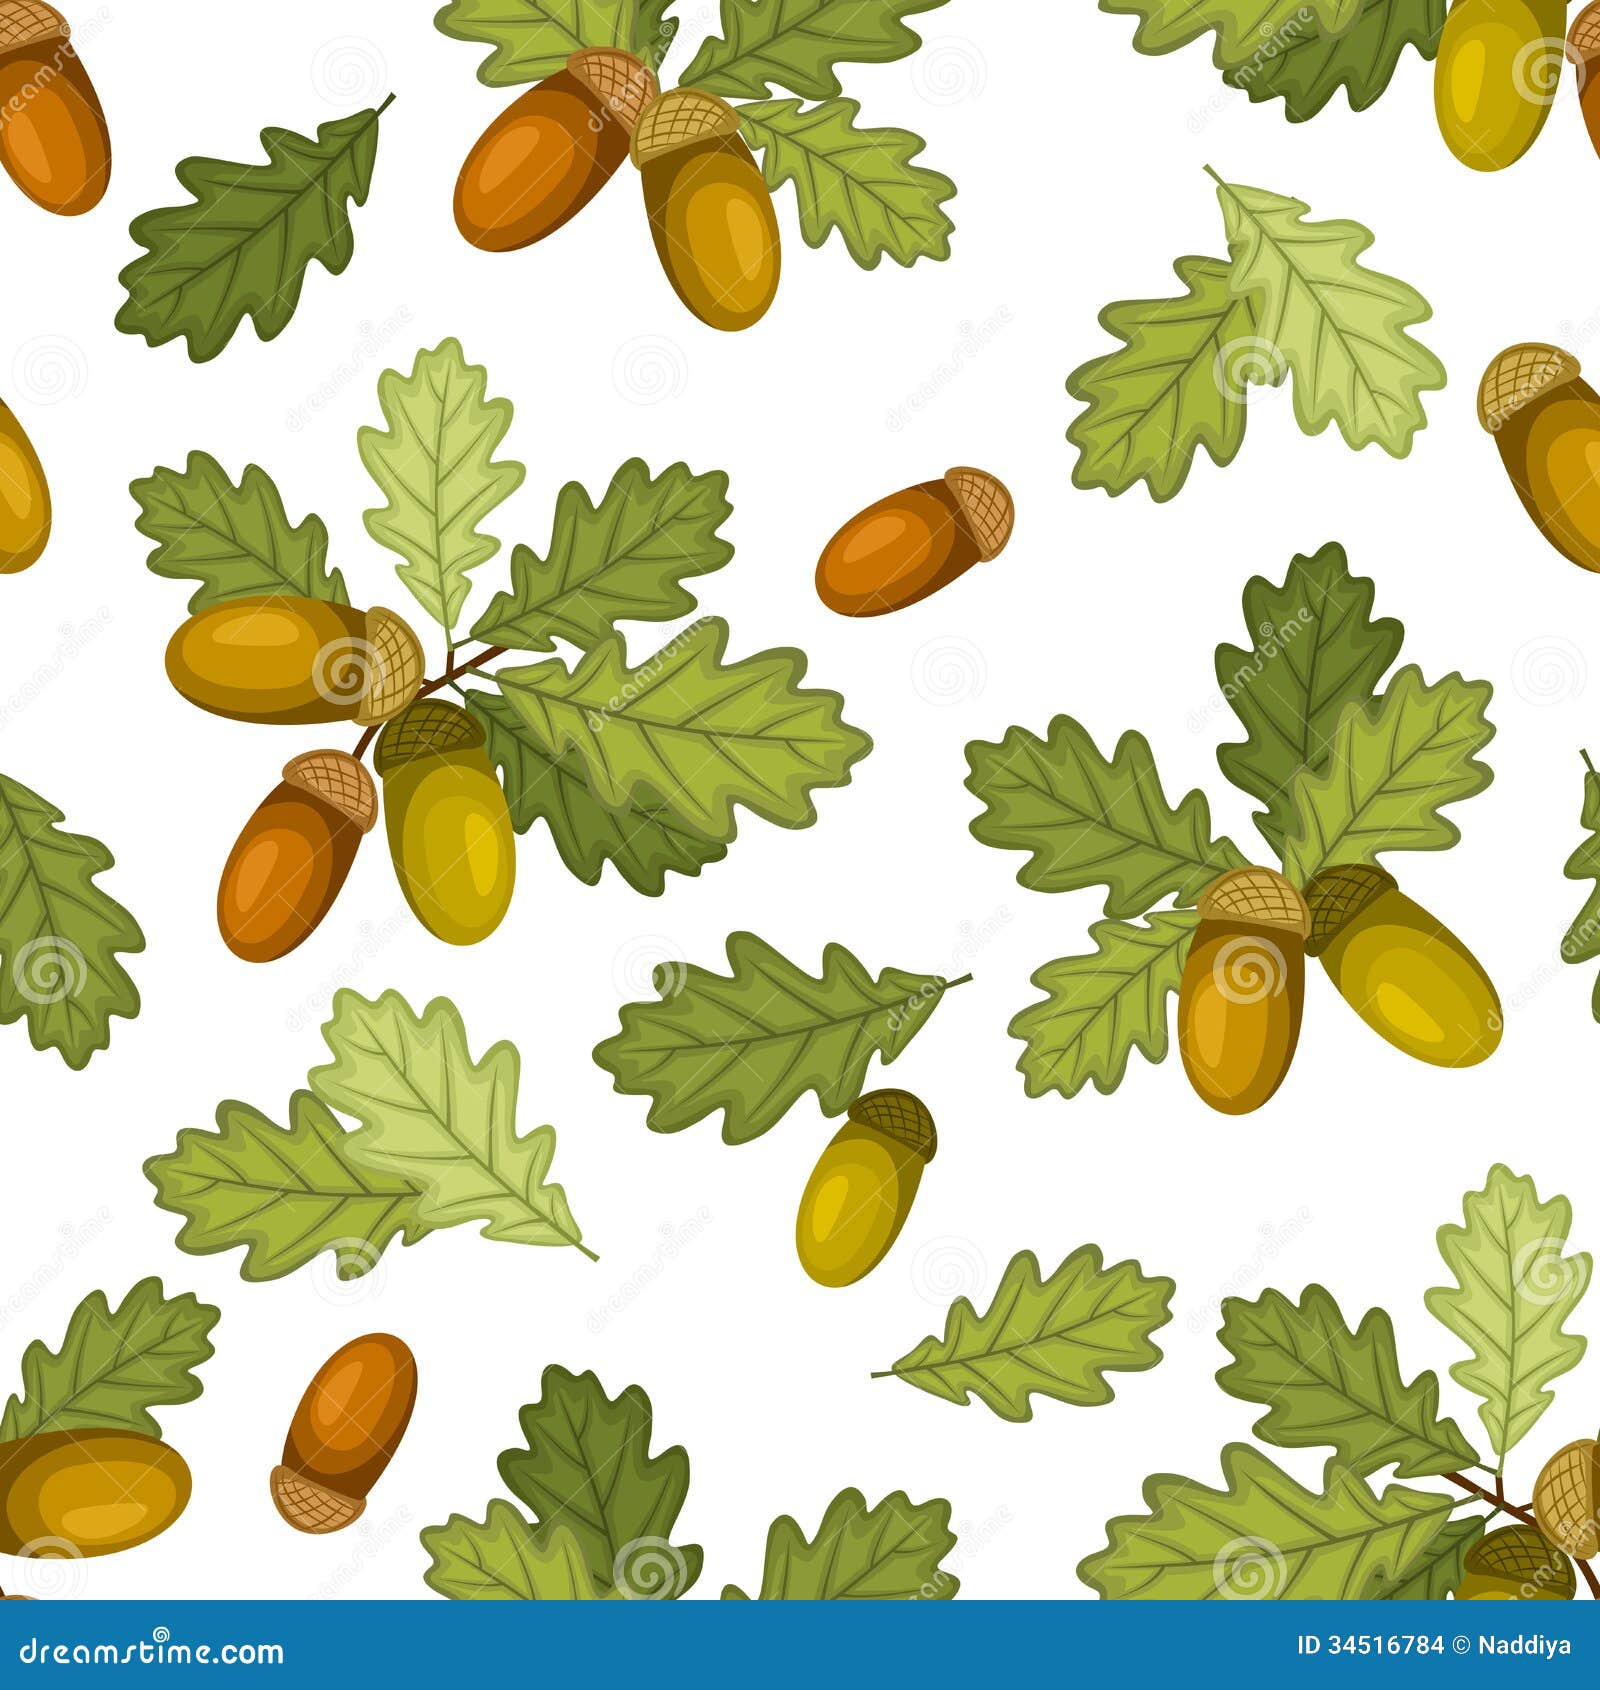 seamless pattern with acorns and oak leaves.